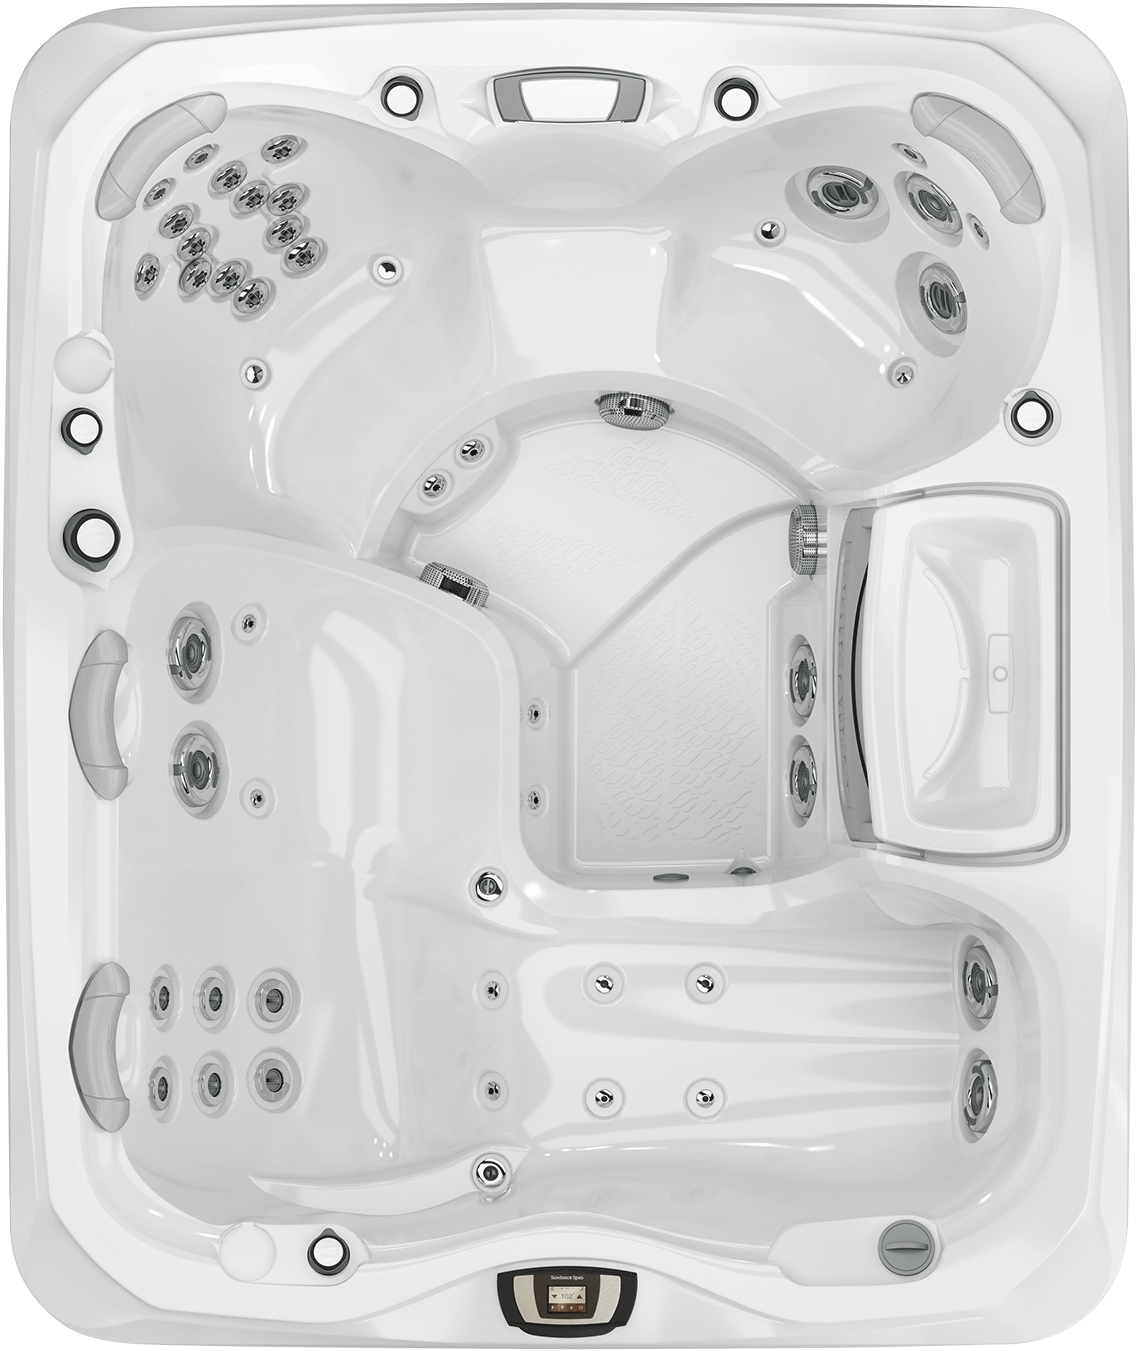 Luxury White Jacuzzi Spa Top View PNG